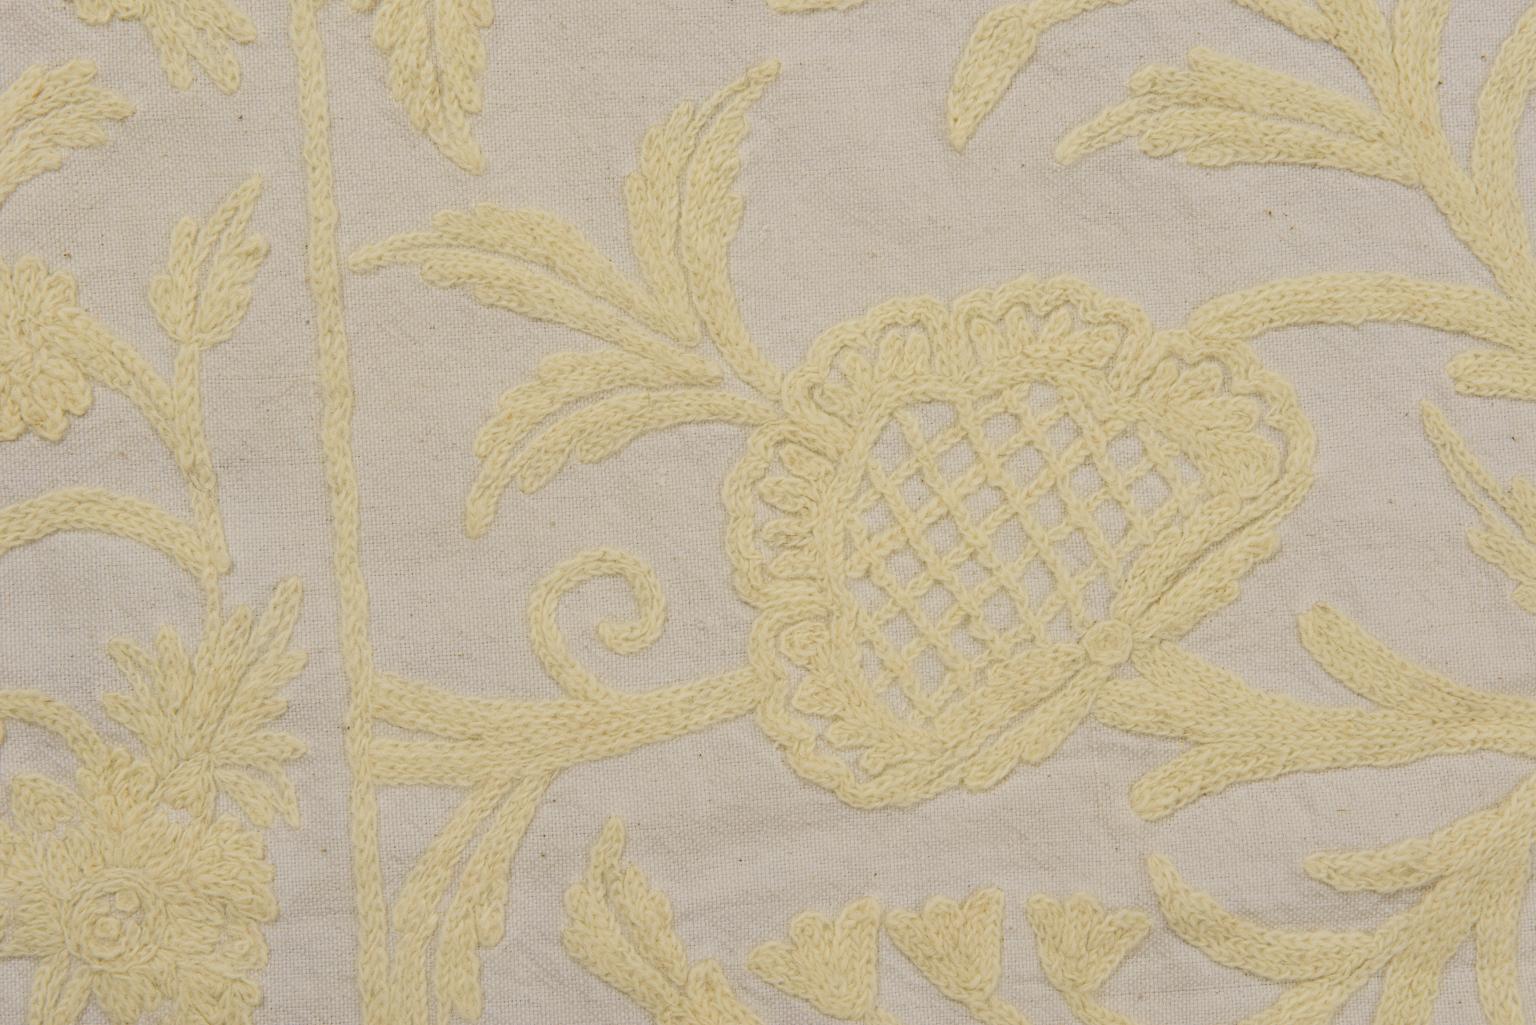 Hand Embroidered White Bedspread For Sale 1